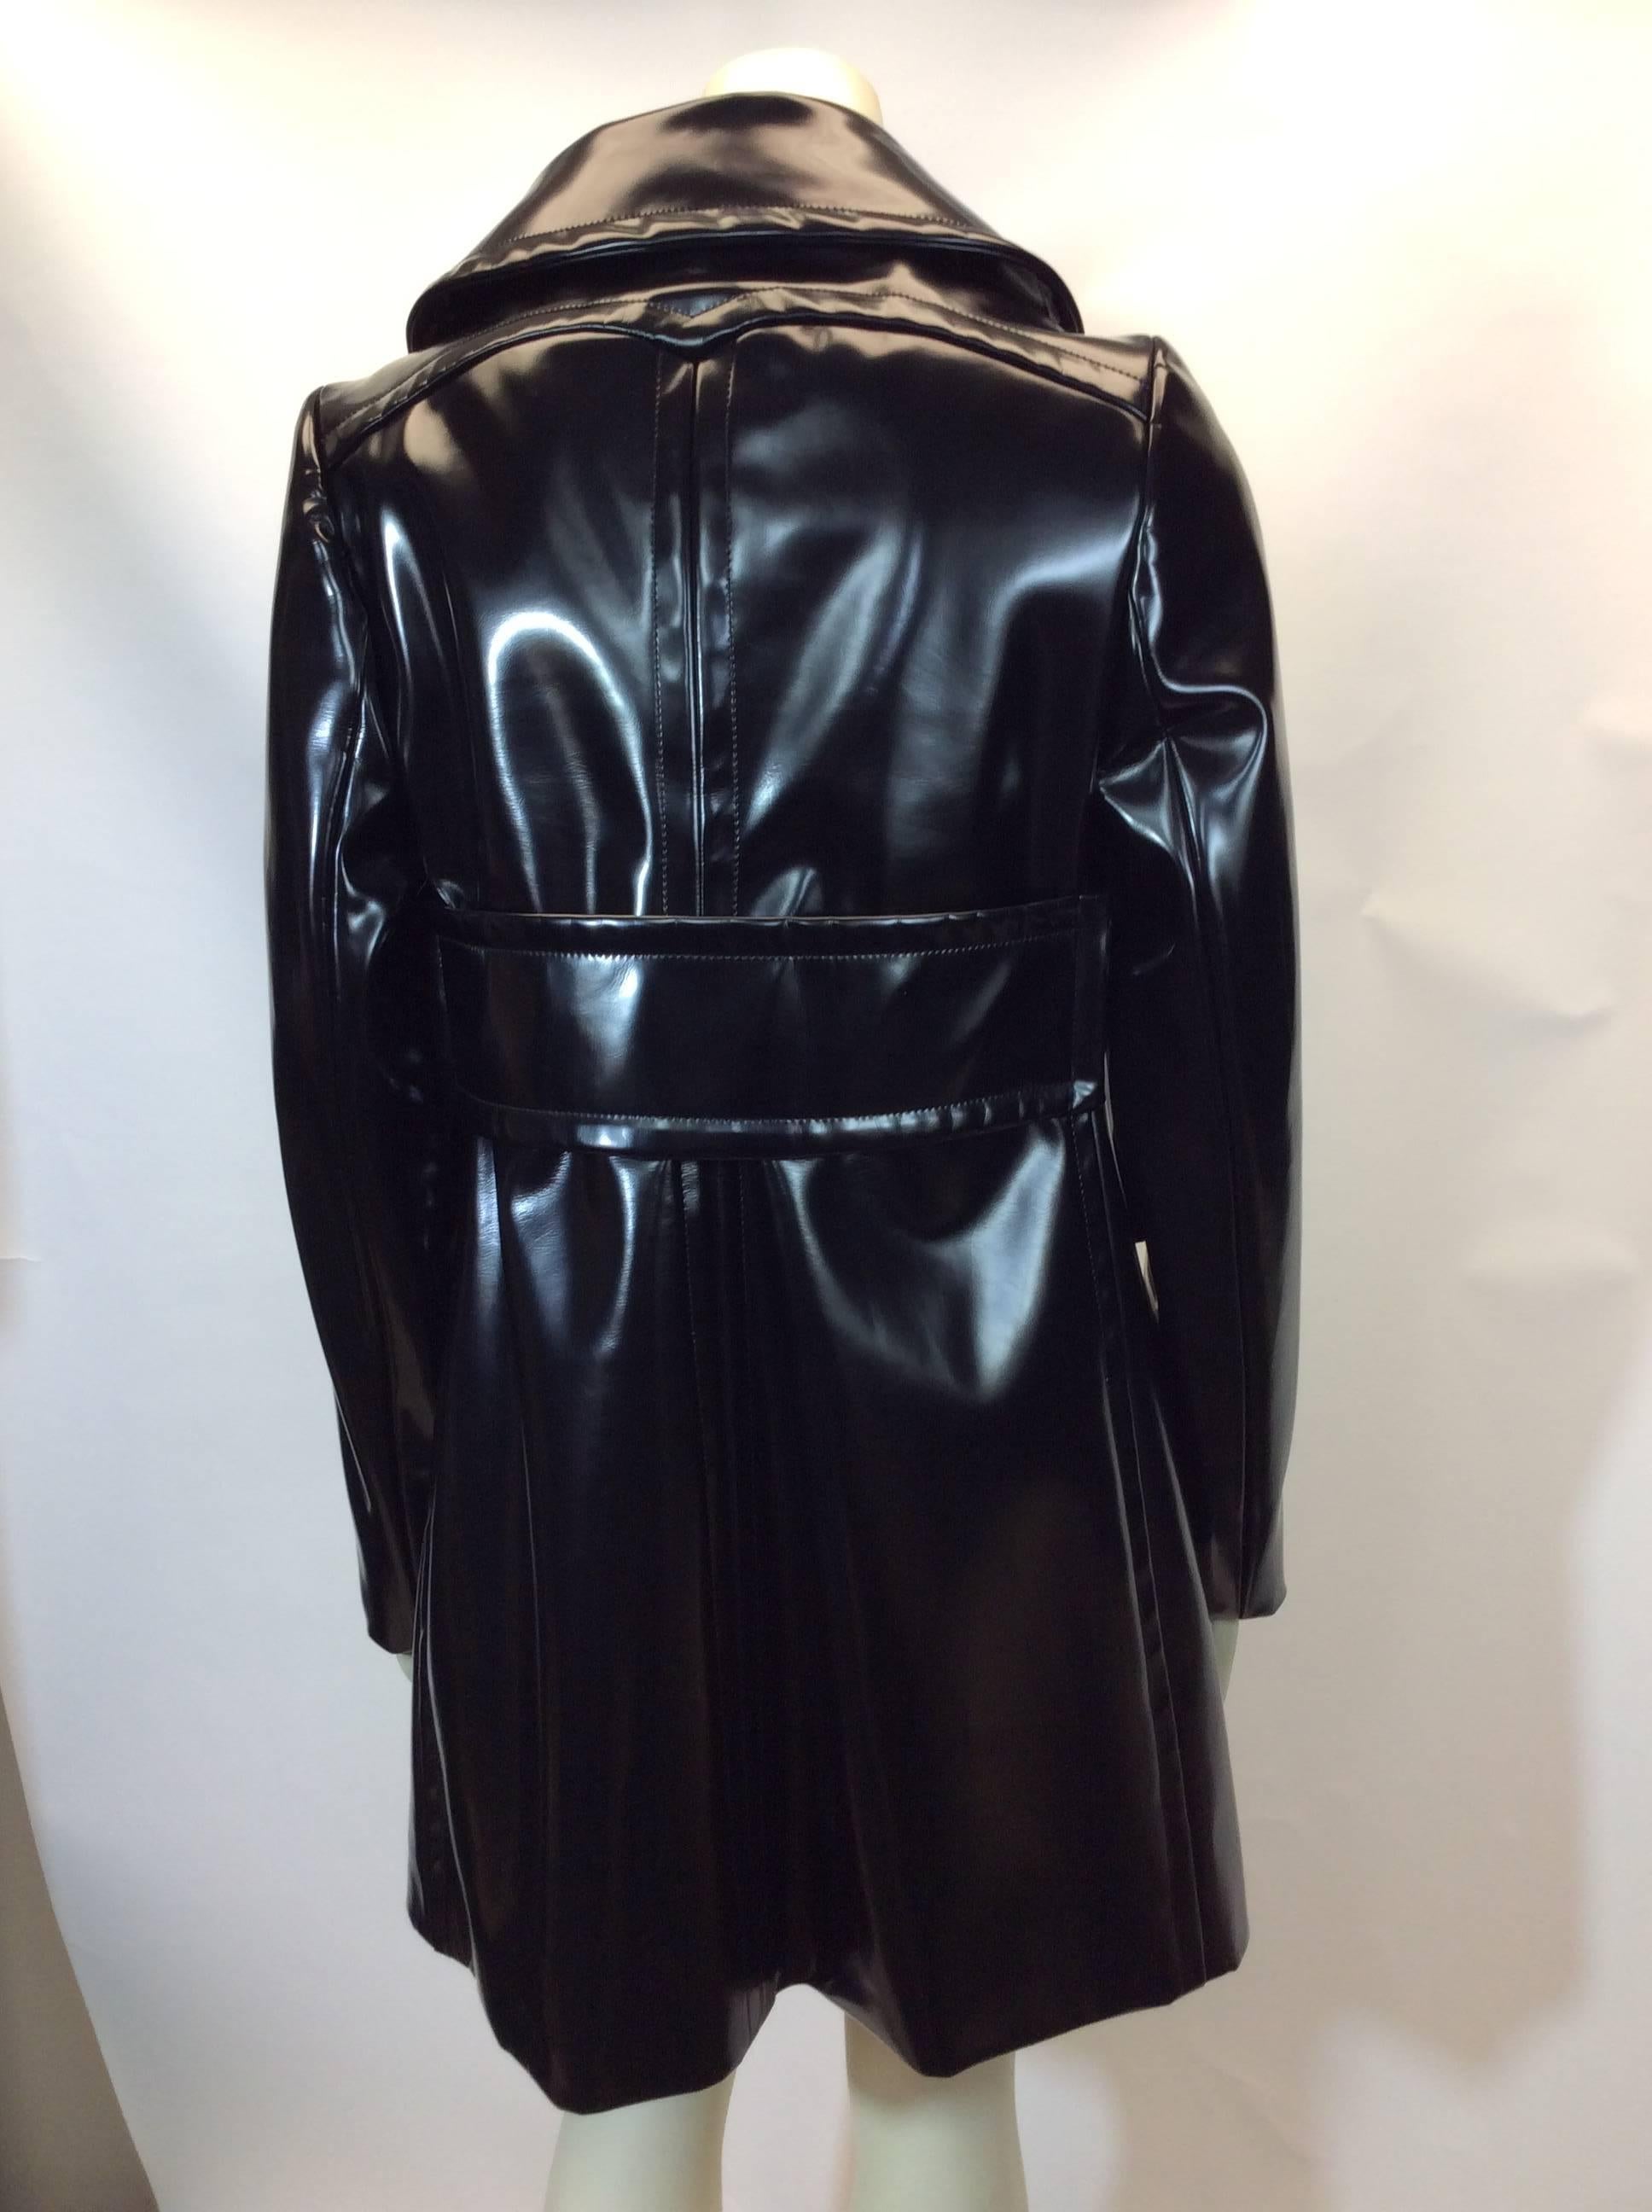 Prada Black Patent Rain Coat With Removable Wool Collar In Excellent Condition For Sale In Narberth, PA